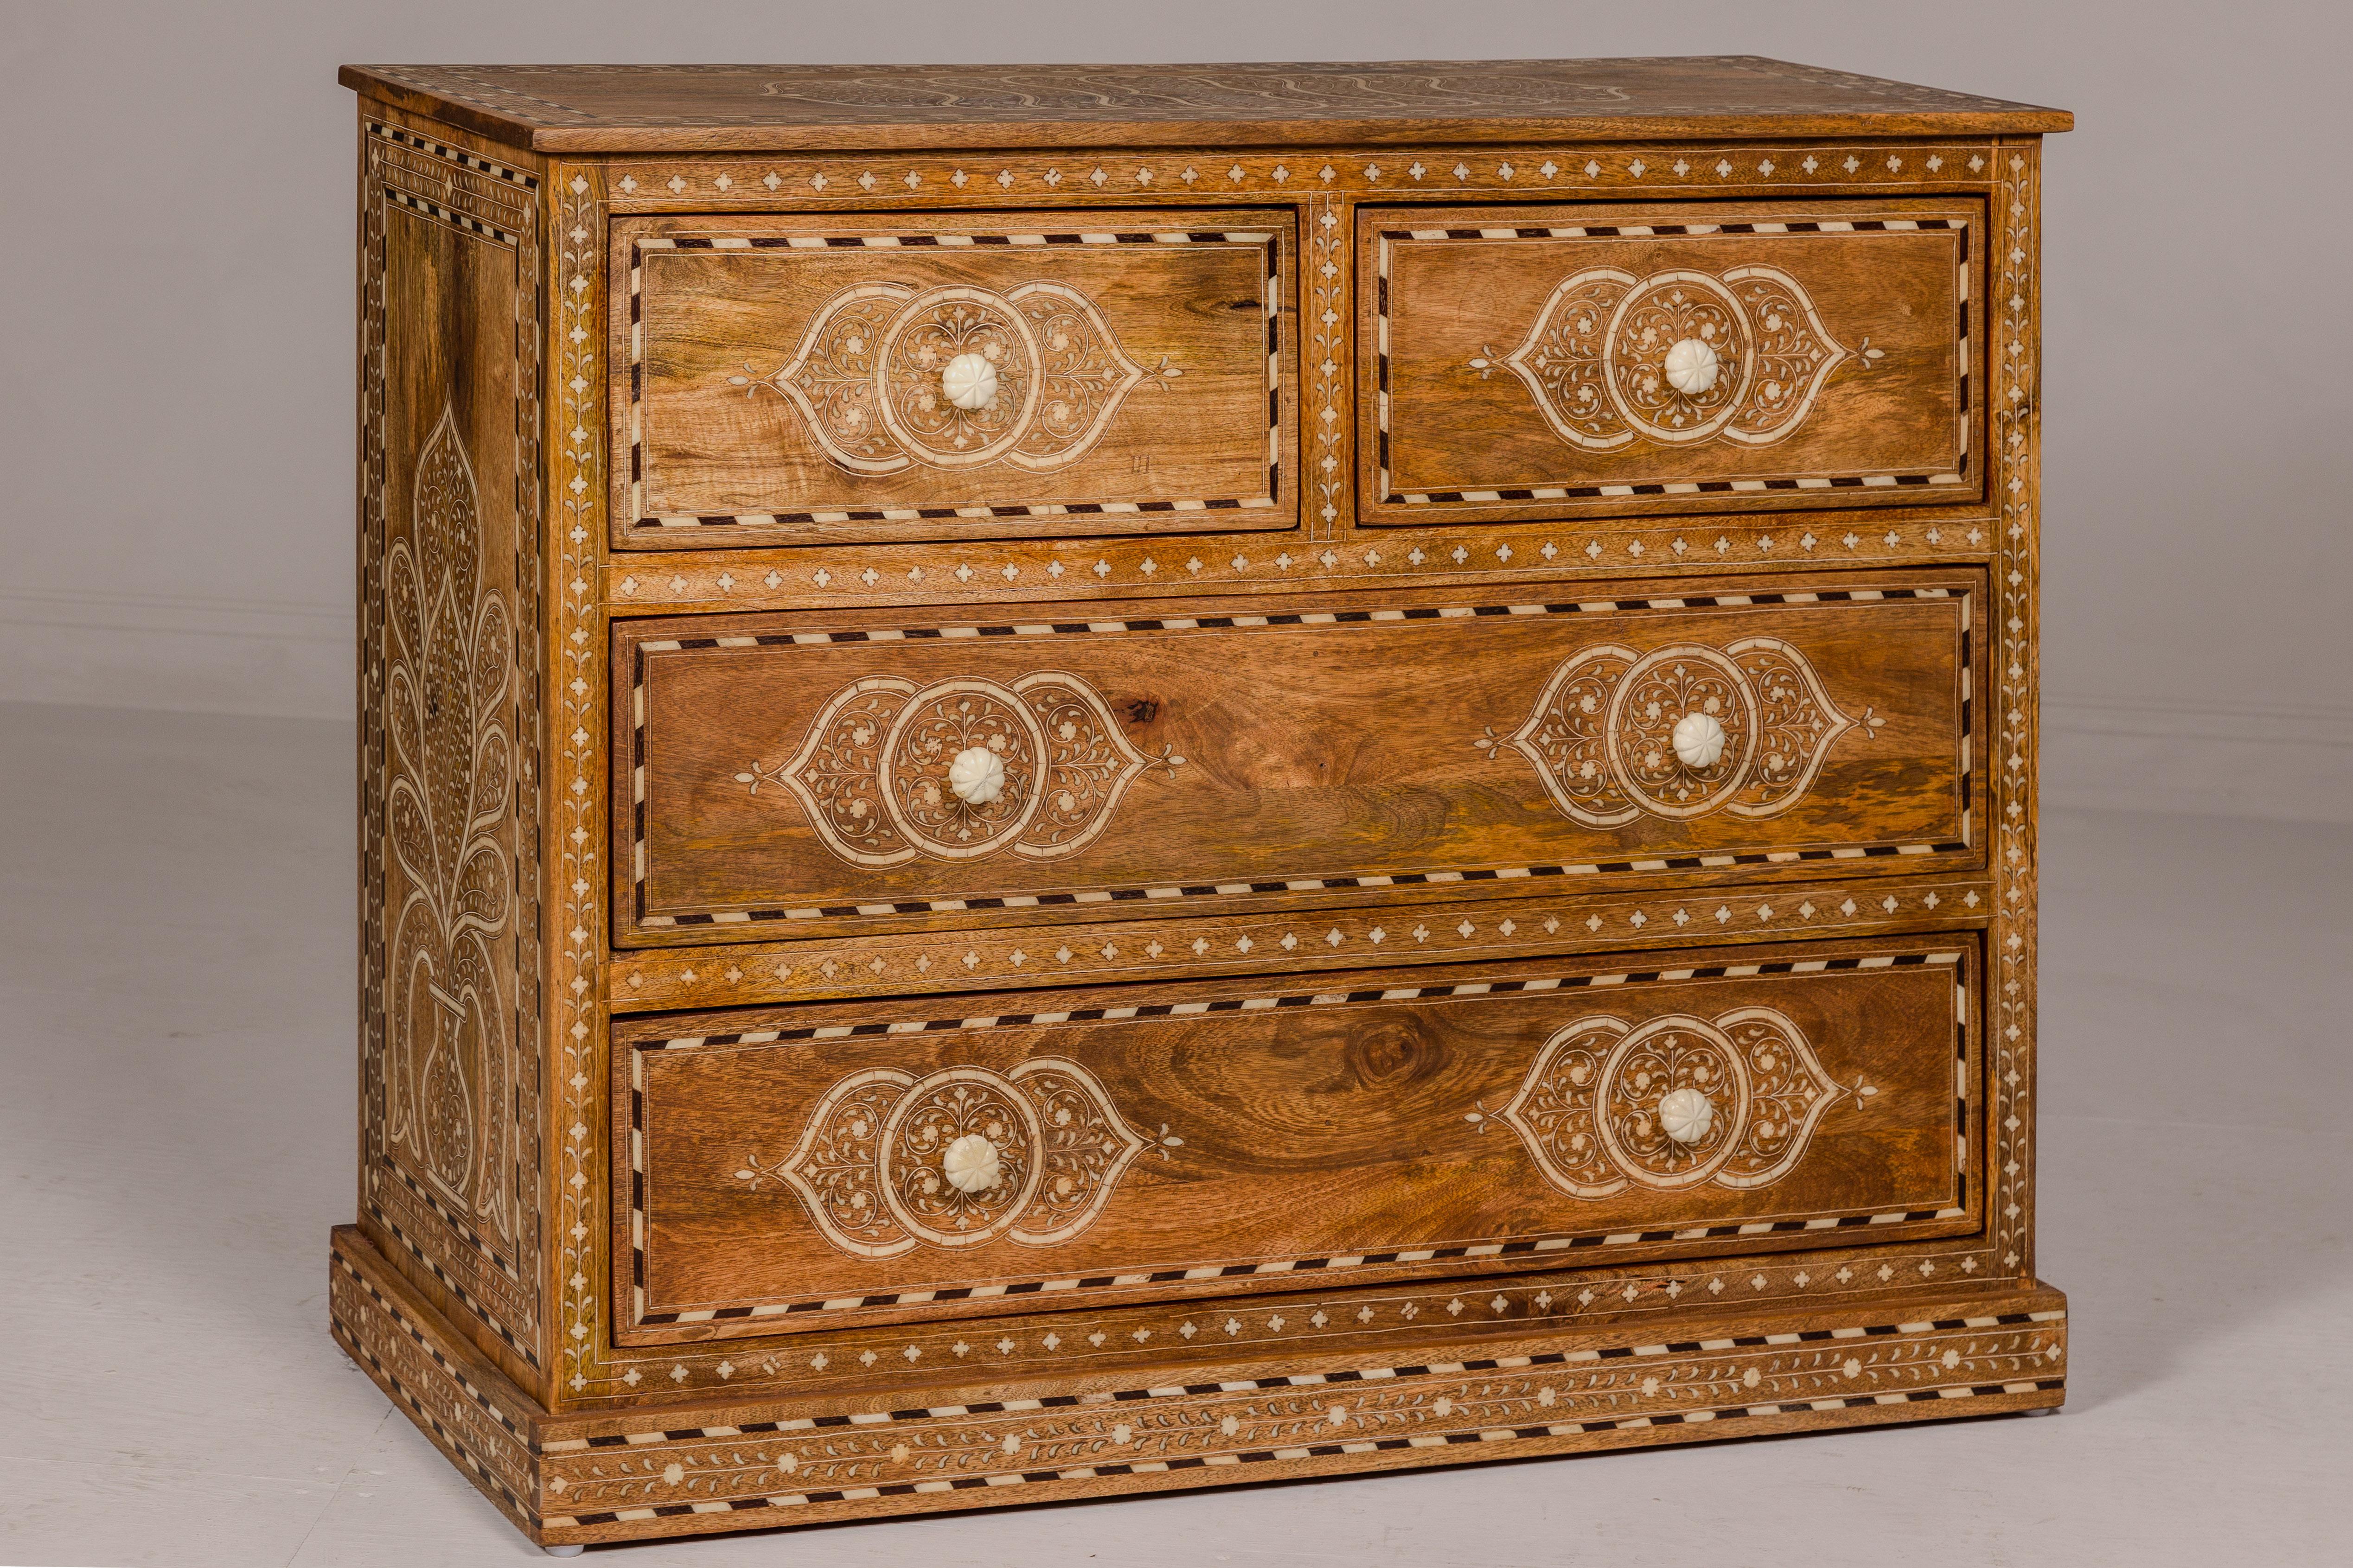 Anglo-Indian Mango Wood Four-Drawer Chest with Floral Themed Bone Inlay For Sale 4